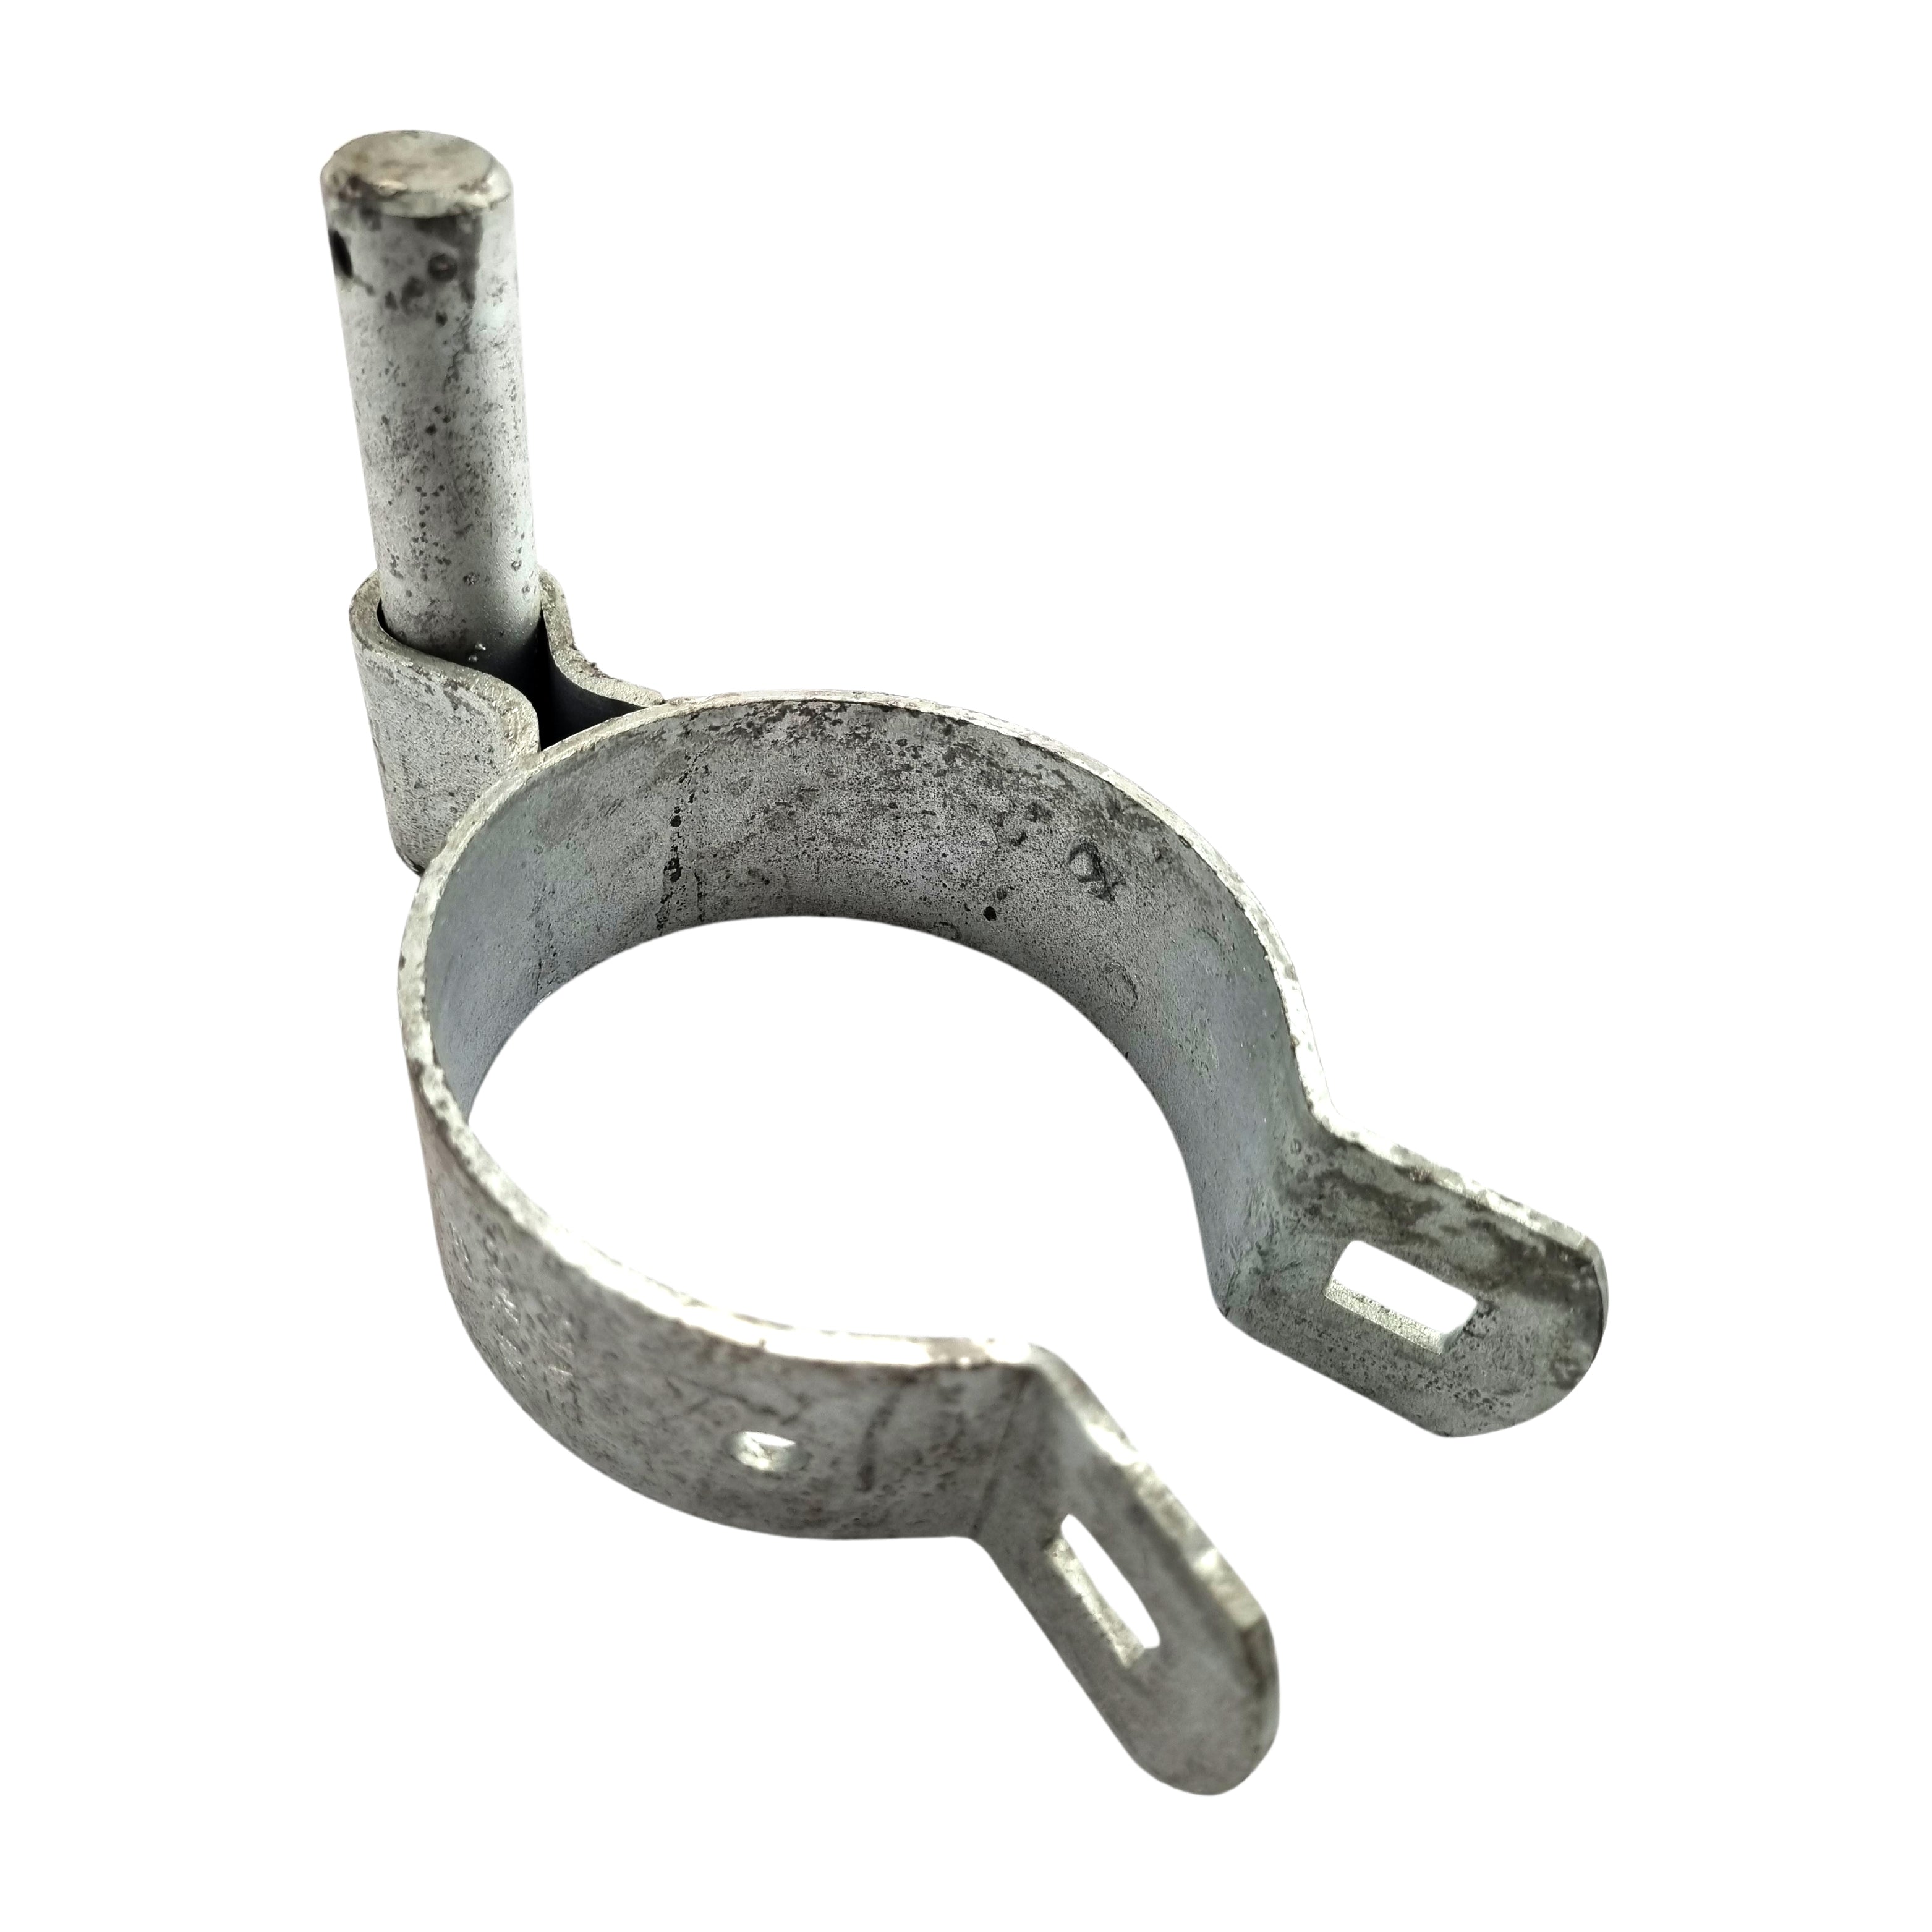 Strap Gudgeon Hinge Galvanised. Australian made. Shop weld on fittings, rural hardware plus fence and gate fittings online. Chain.com.au. Australia wide shipping.